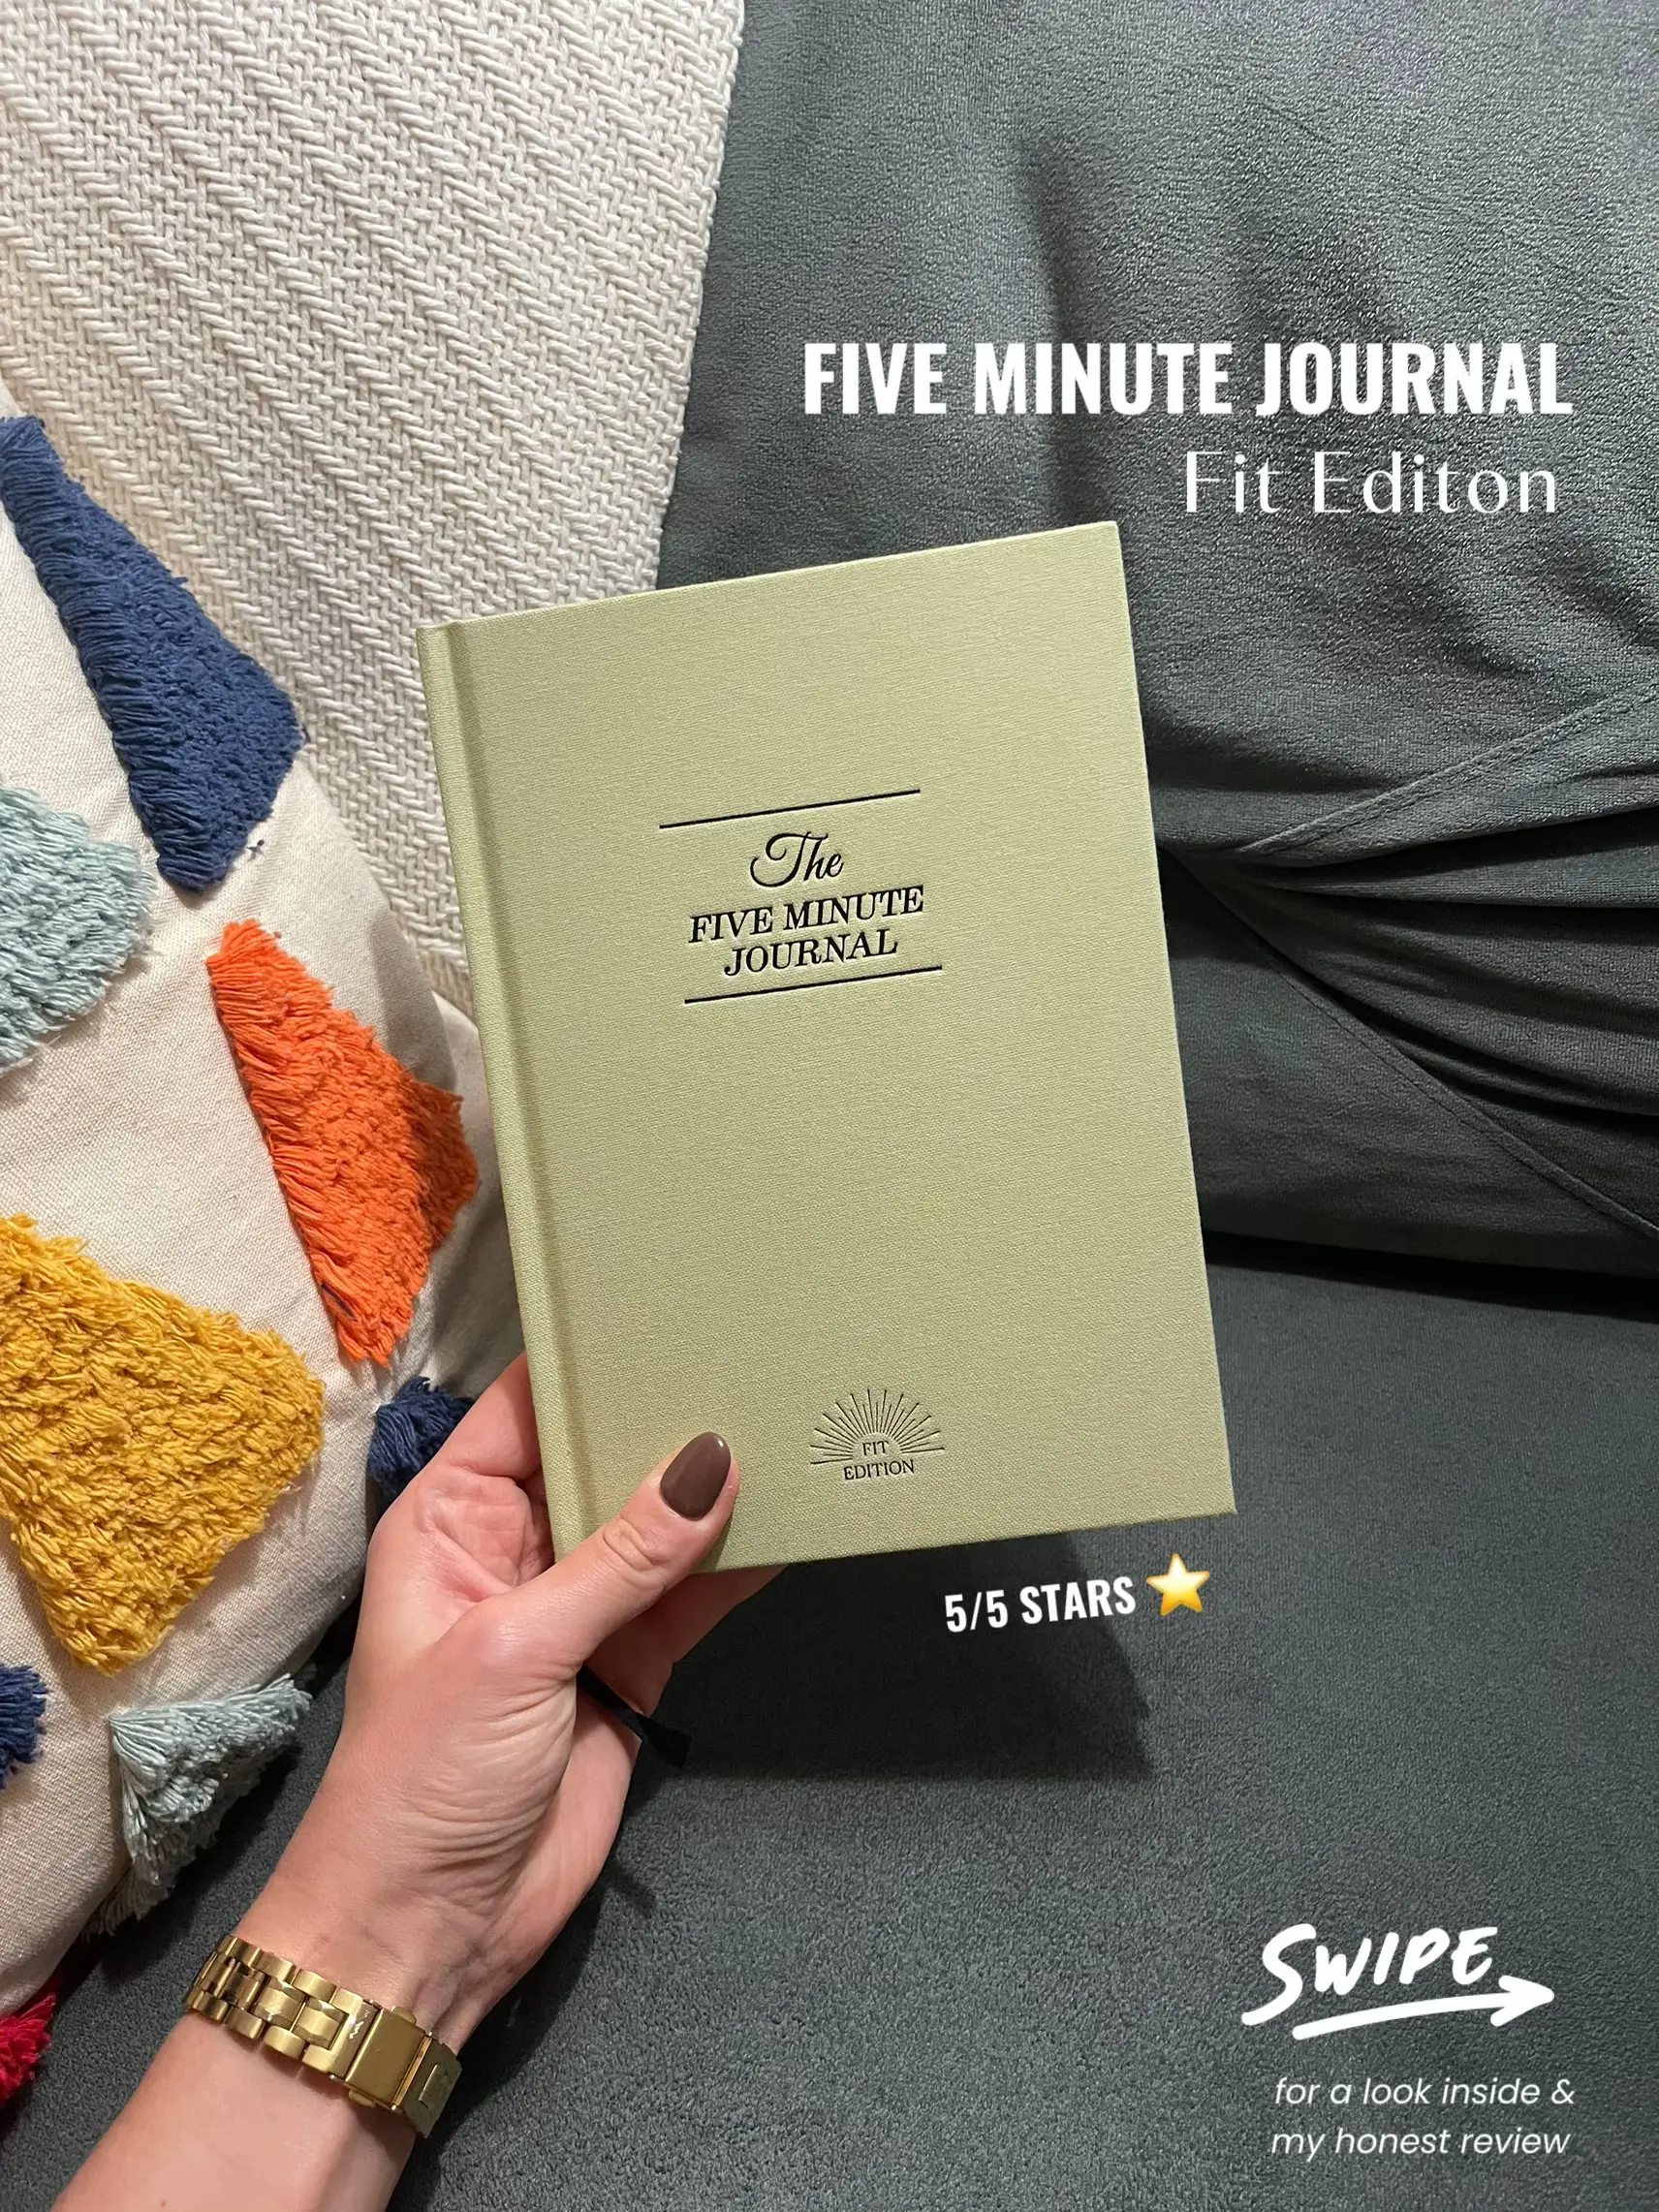 Five Minute Journal (@fiveminutejournal) • Instagram photos and videos